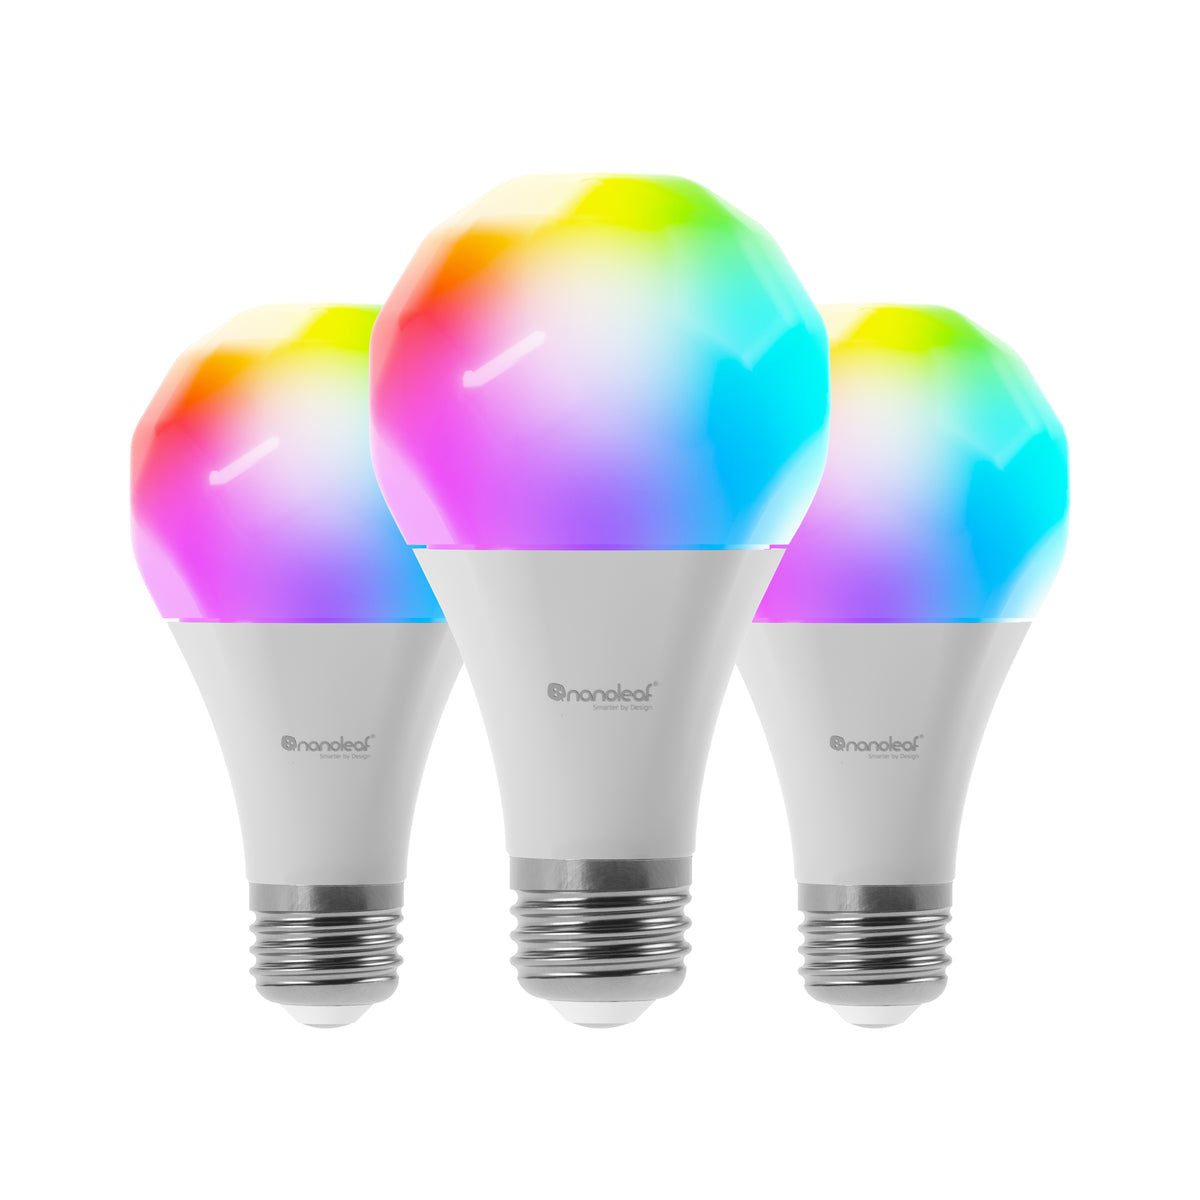 NANOLEAF Essentials Smart Bulb A19/A60 Color Changing RGBCW Bluetooth/Thread Enabled - 3 Packs - White